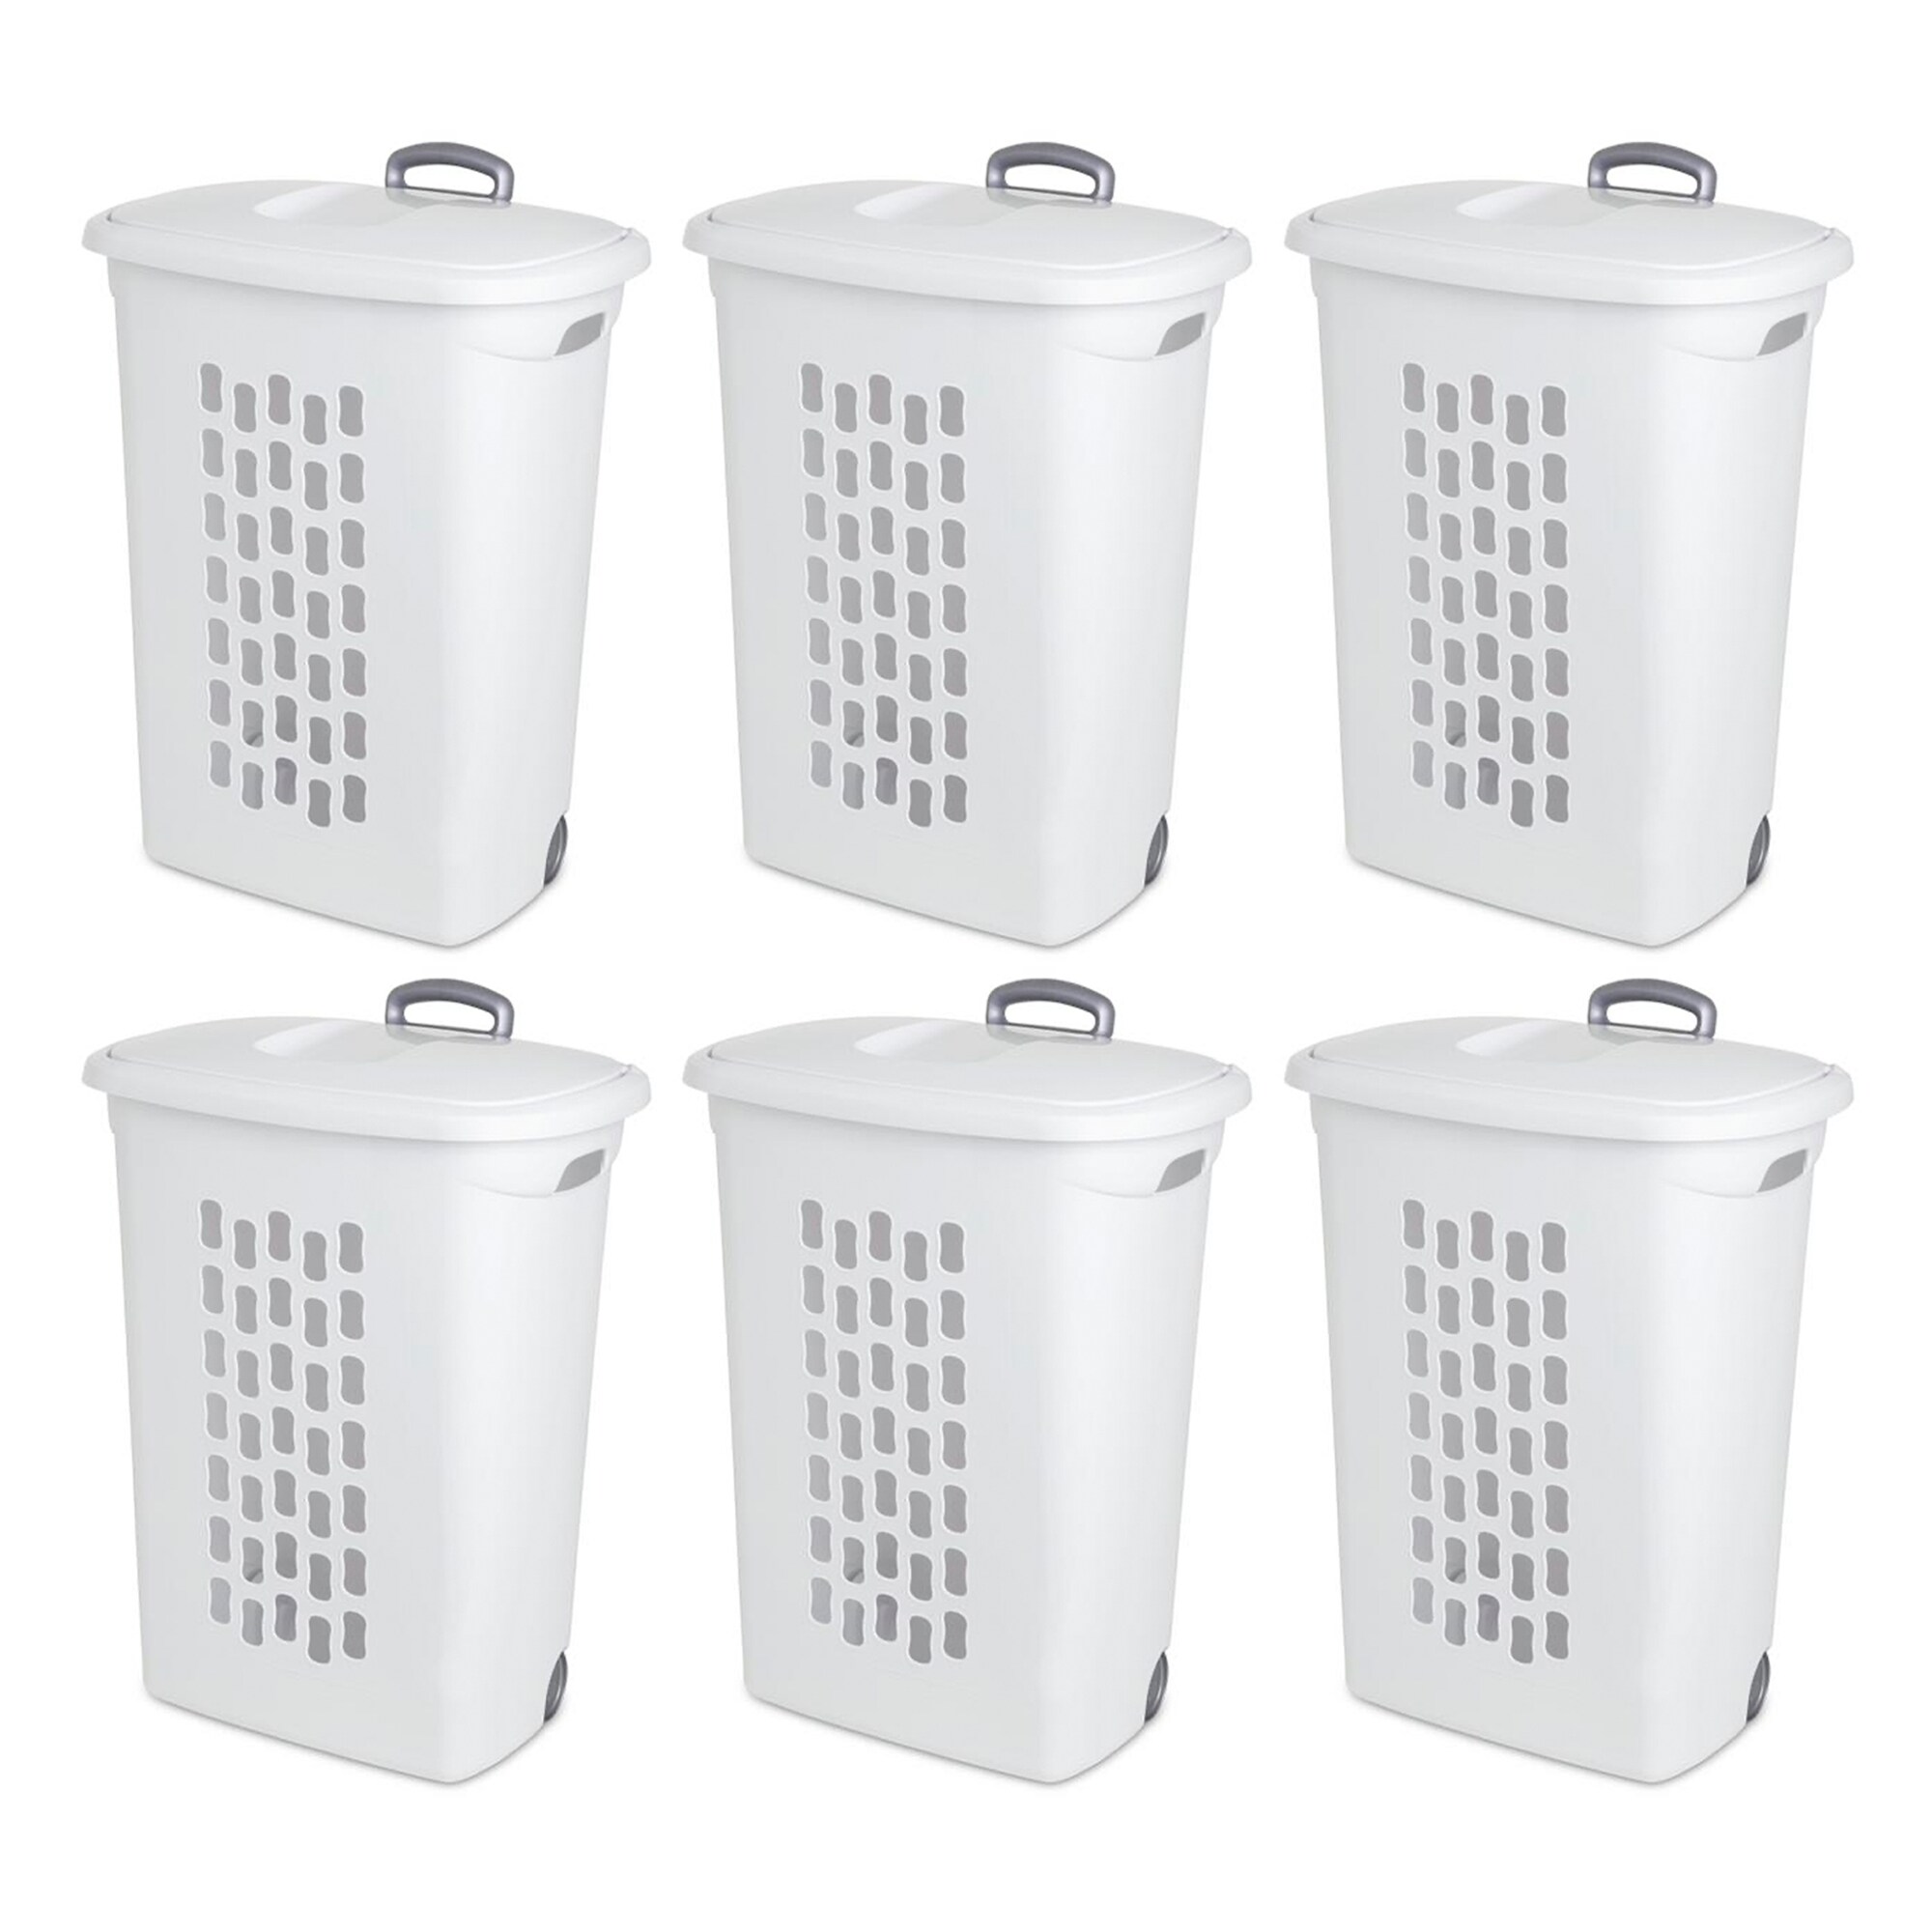 Details about   57 Litre Laundry Basket Plastic Hamper Washing Clothes Stoarge Bin With Lid 